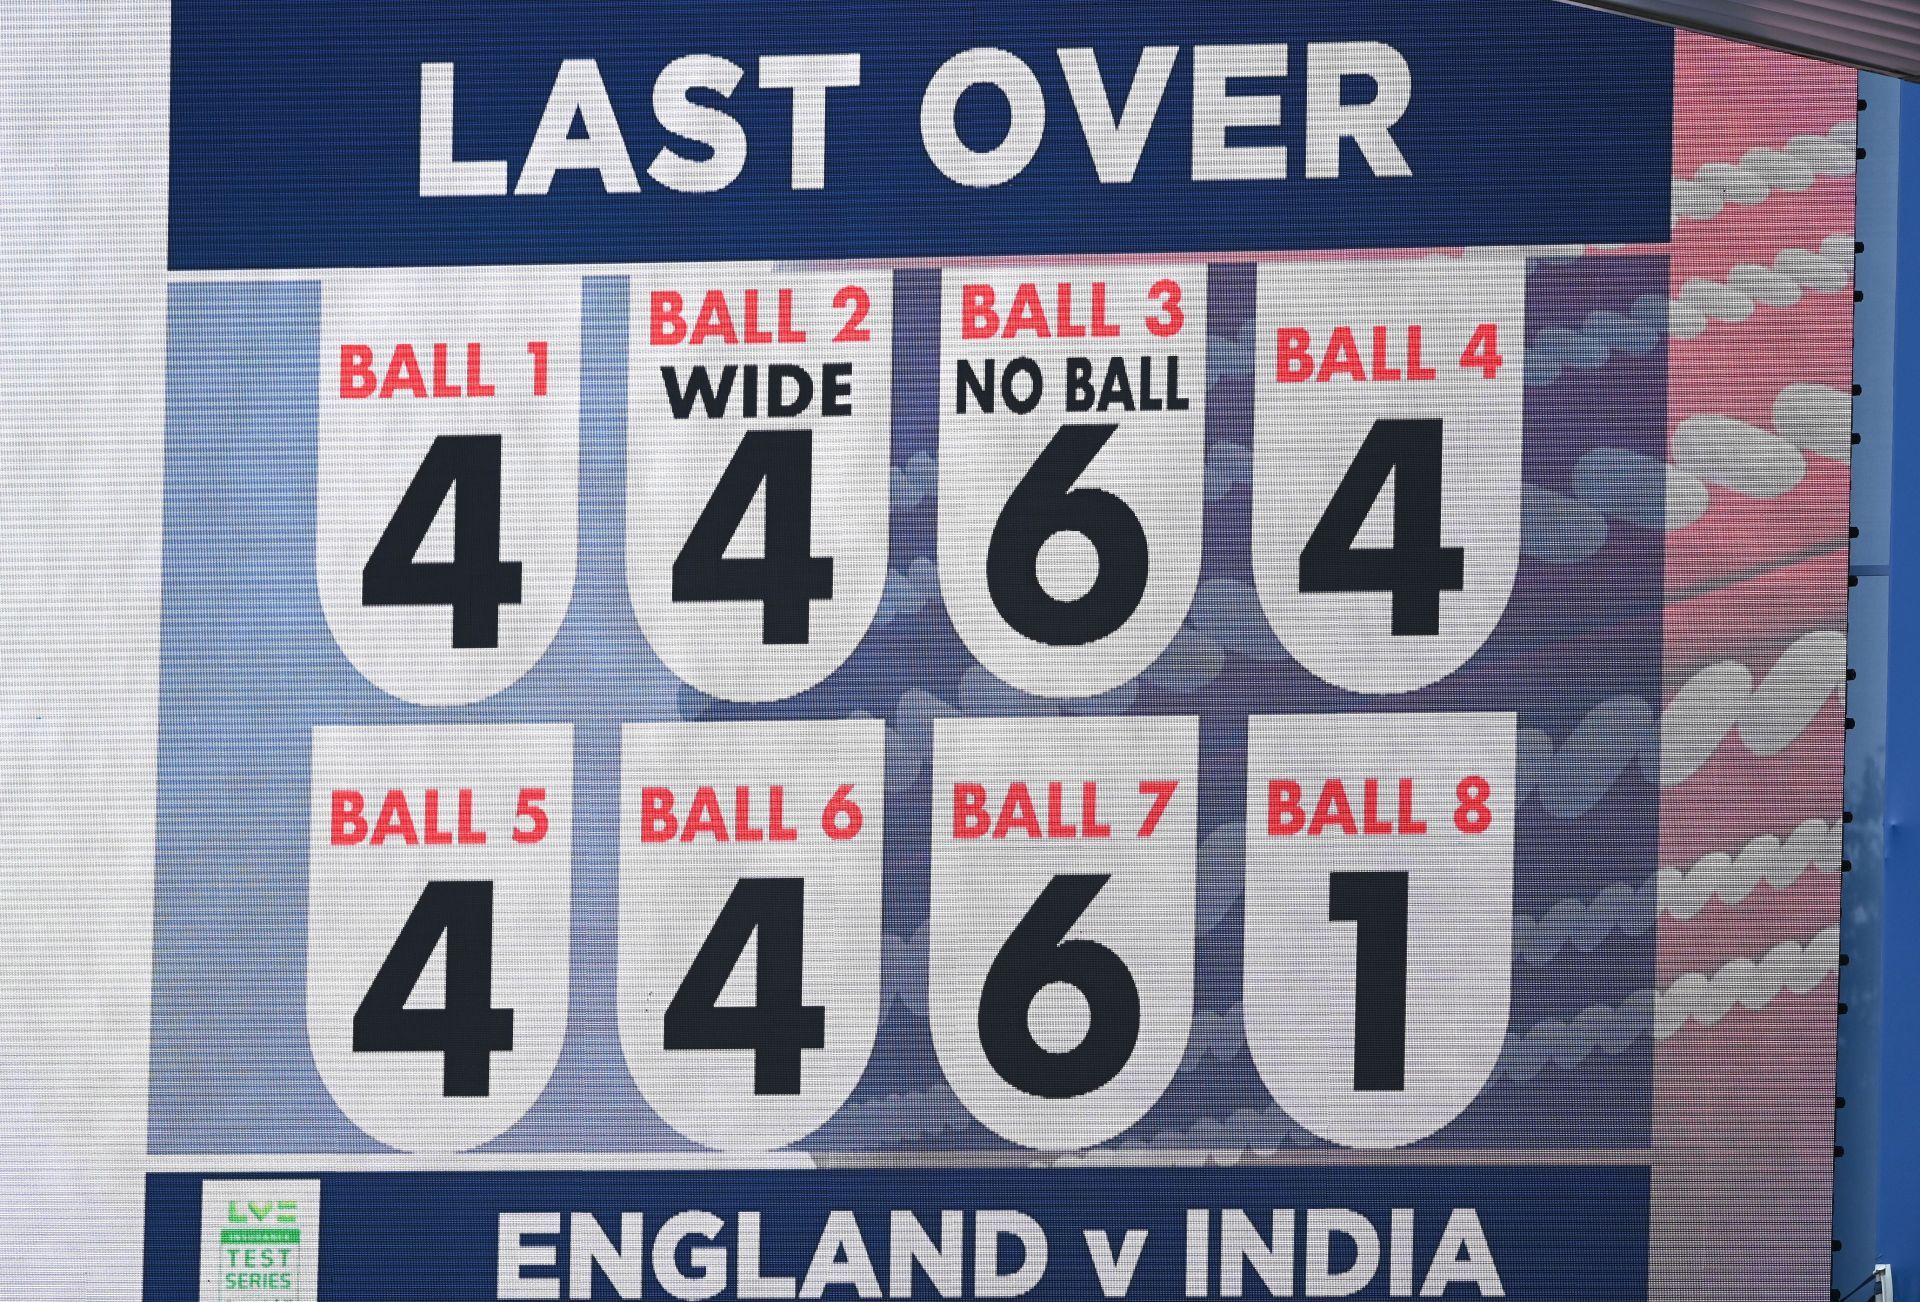 Team India scored 416 runs in the first innings of the Edgbaston Test against England (Image: Getty)